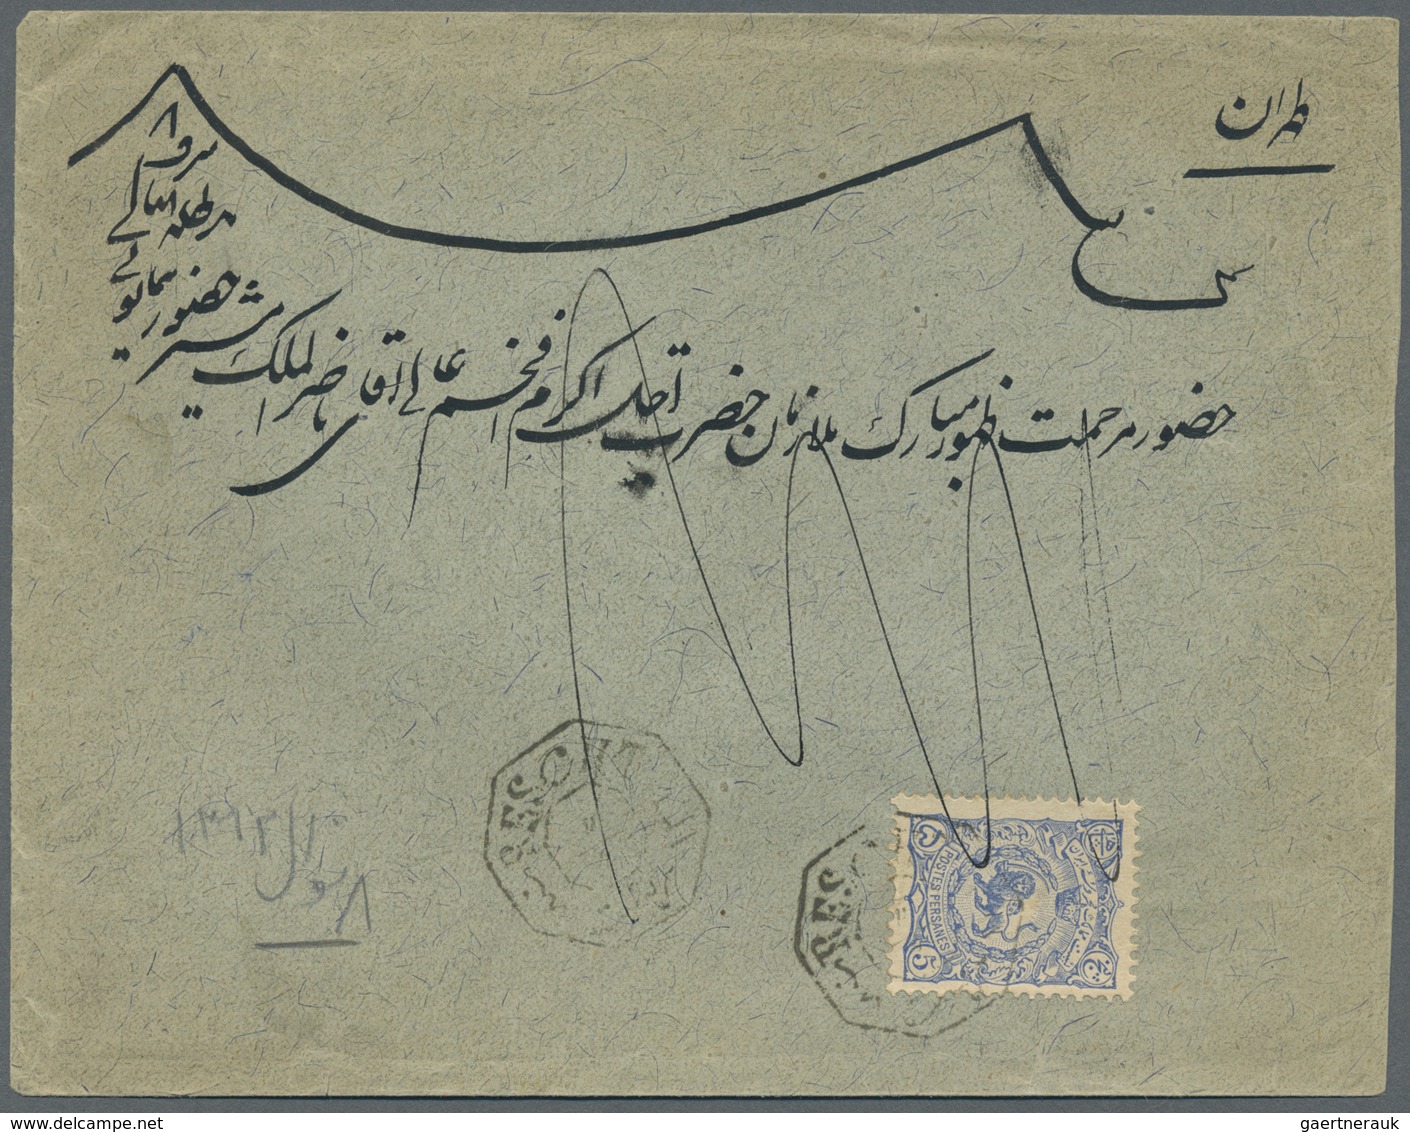 Br Iran: 1890-1910, 12 covers including registered mail, scarce cancellations Lengueboud, Djoulfa and R